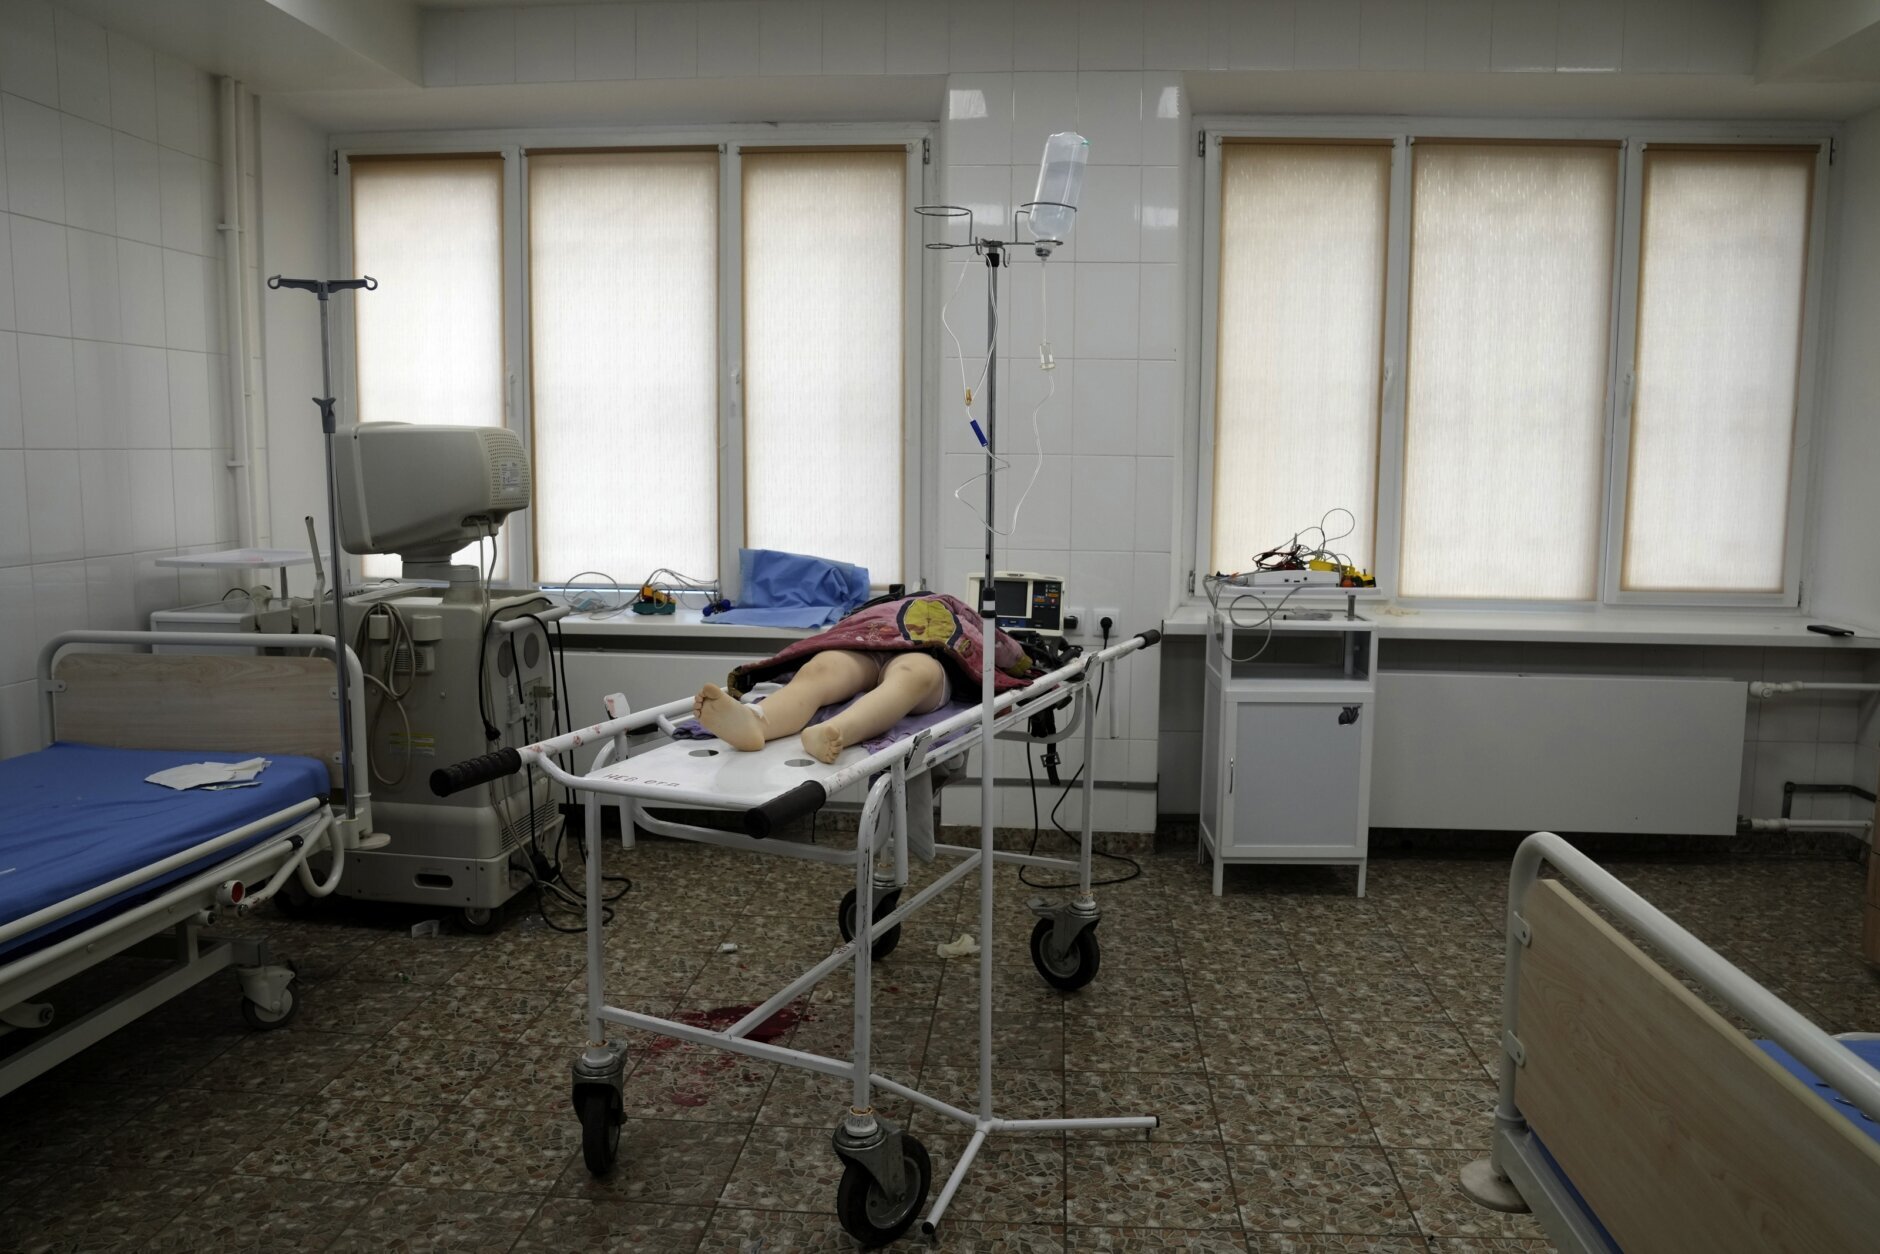 The lifeless body of a girl killed during the shelling of a residential area lies on a medical cart at the city hospital of Mariupol, eastern Ukraine, Sunday, Feb. 27, 2022. (AP Photo/Evgeniy Maloletka)